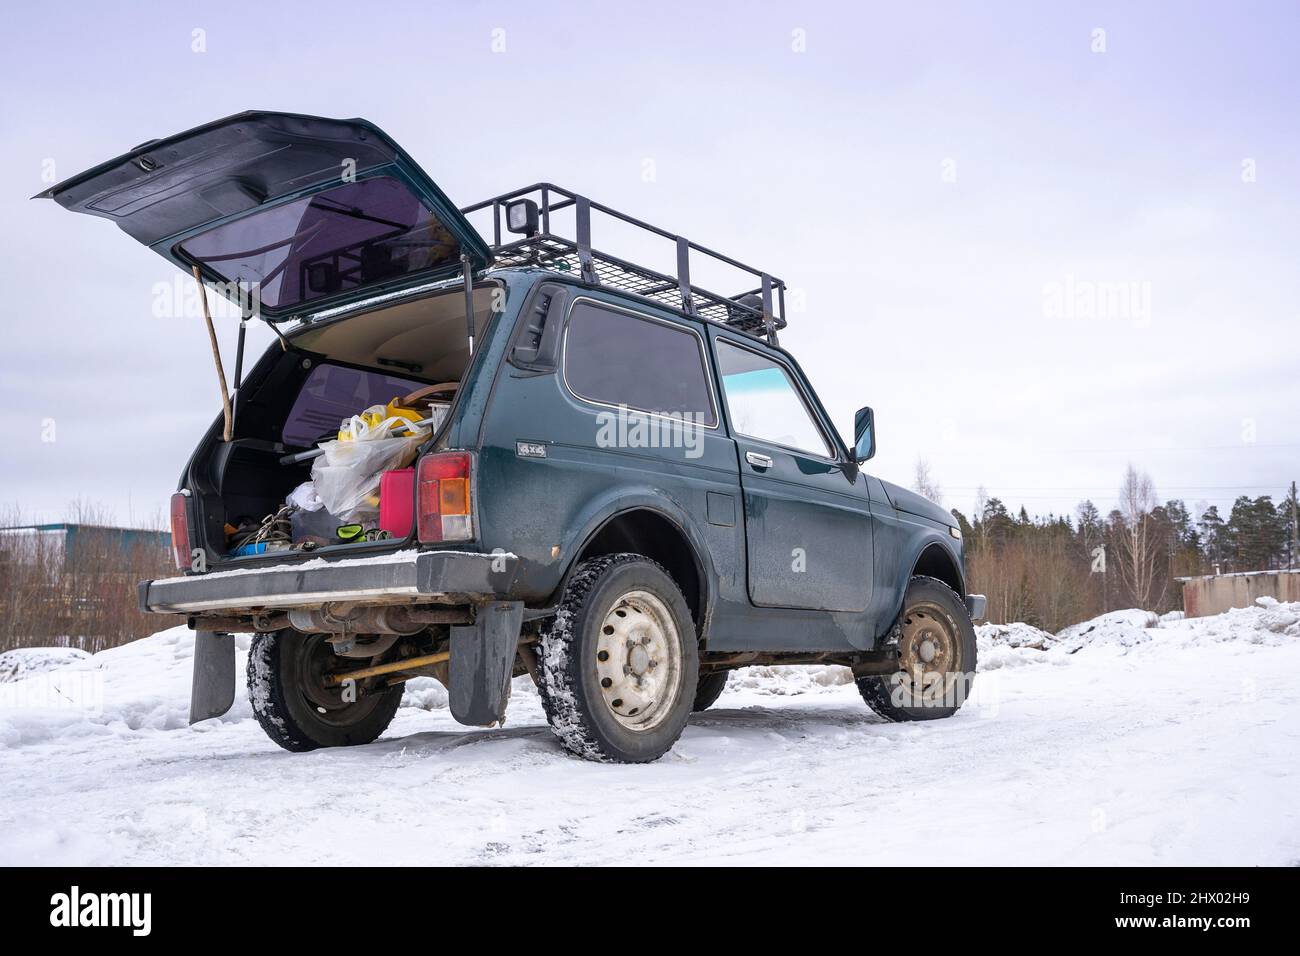 An old brutal classic 4x4 SUV stands with an open trunk on a snowy winter road. Stock Photo